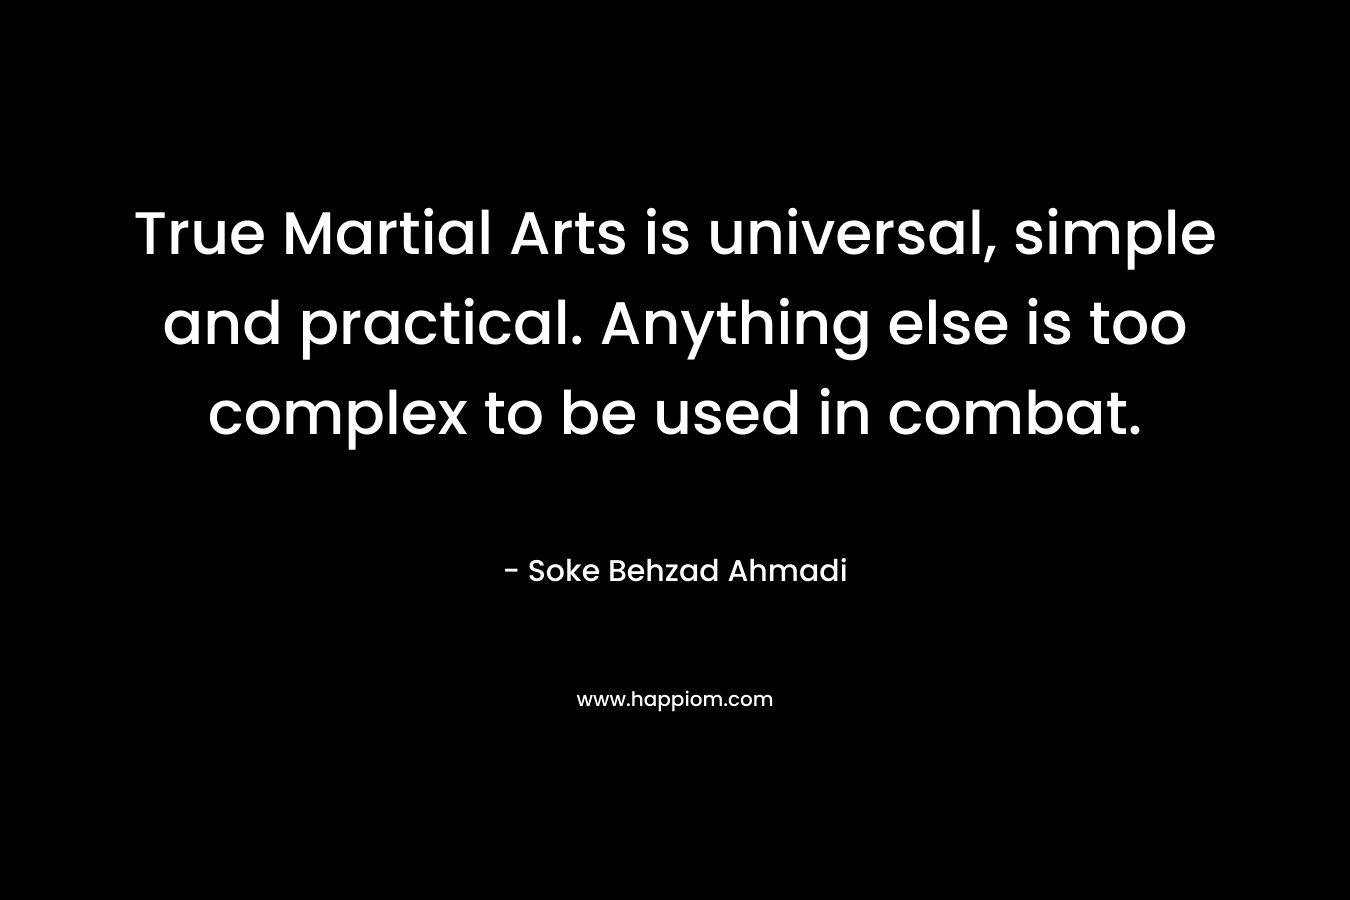 True Martial Arts is universal, simple and practical. Anything else is too complex to be used in combat.